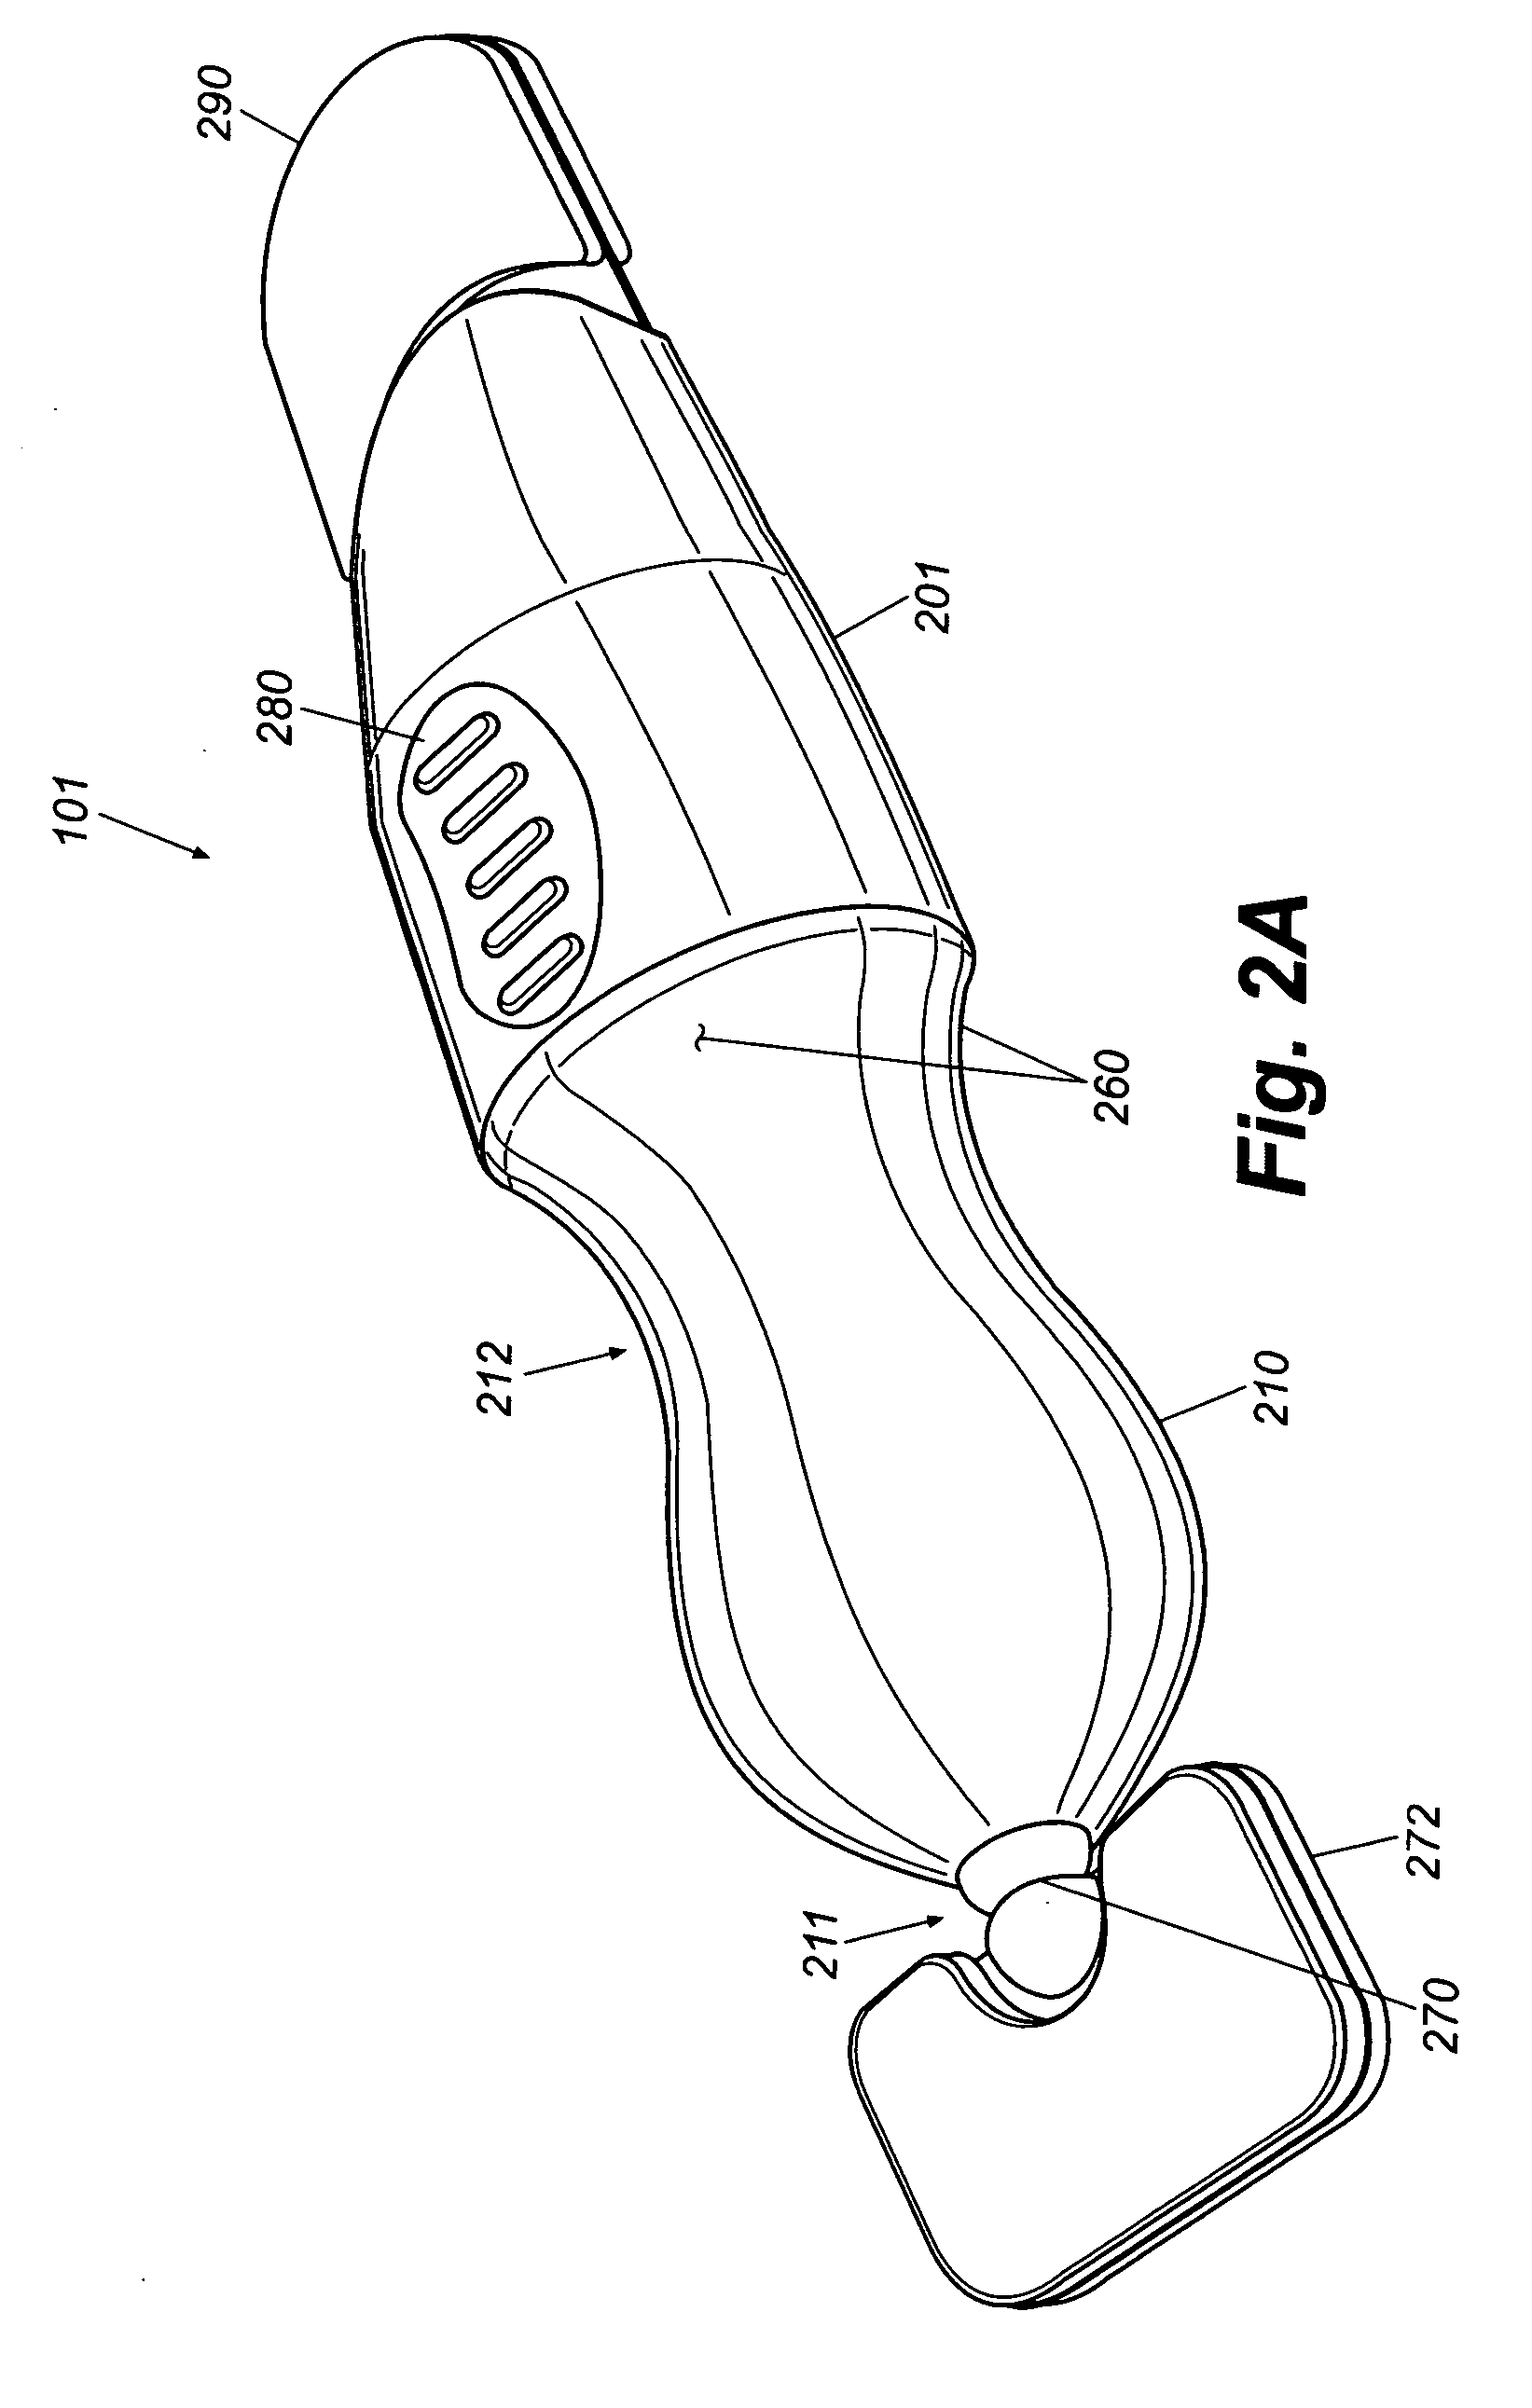 Dispensing container with nipple dispensing head